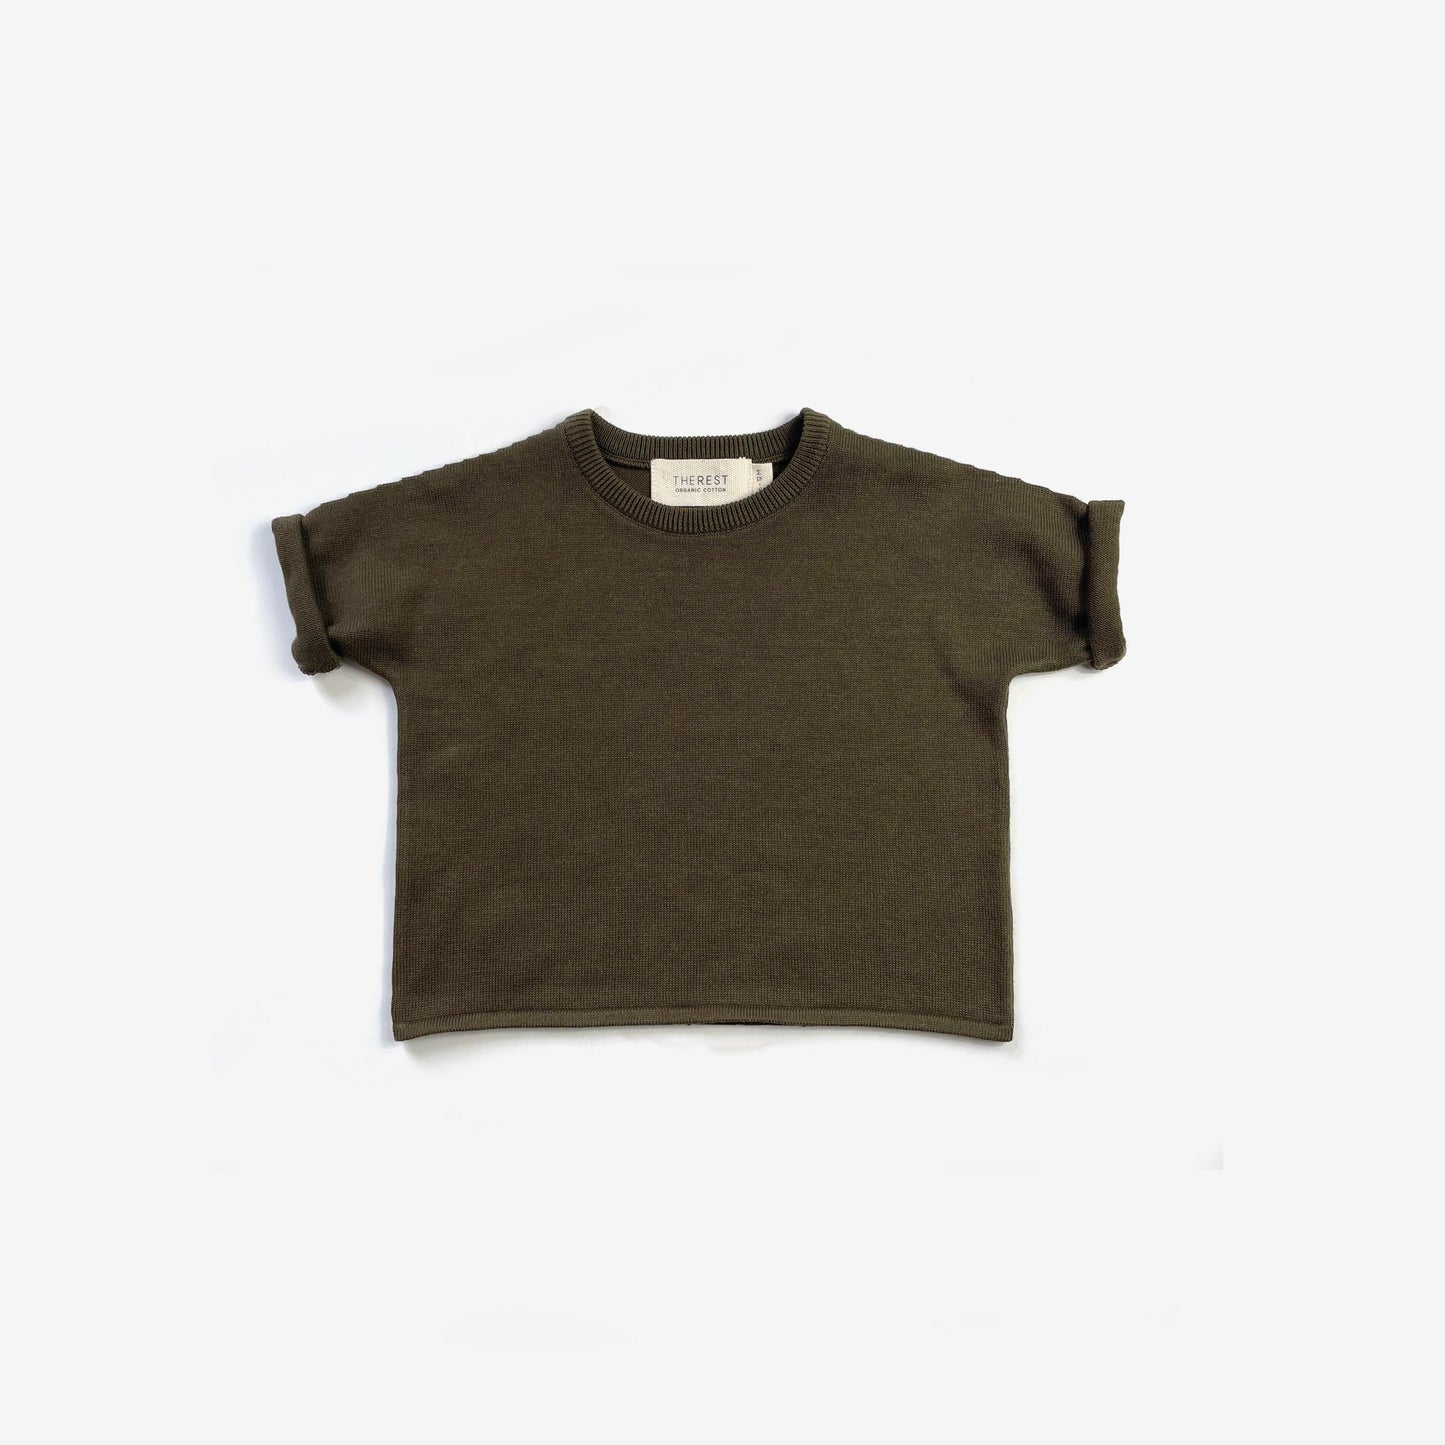 The Rest - Relaxed Knit Tee - Olive